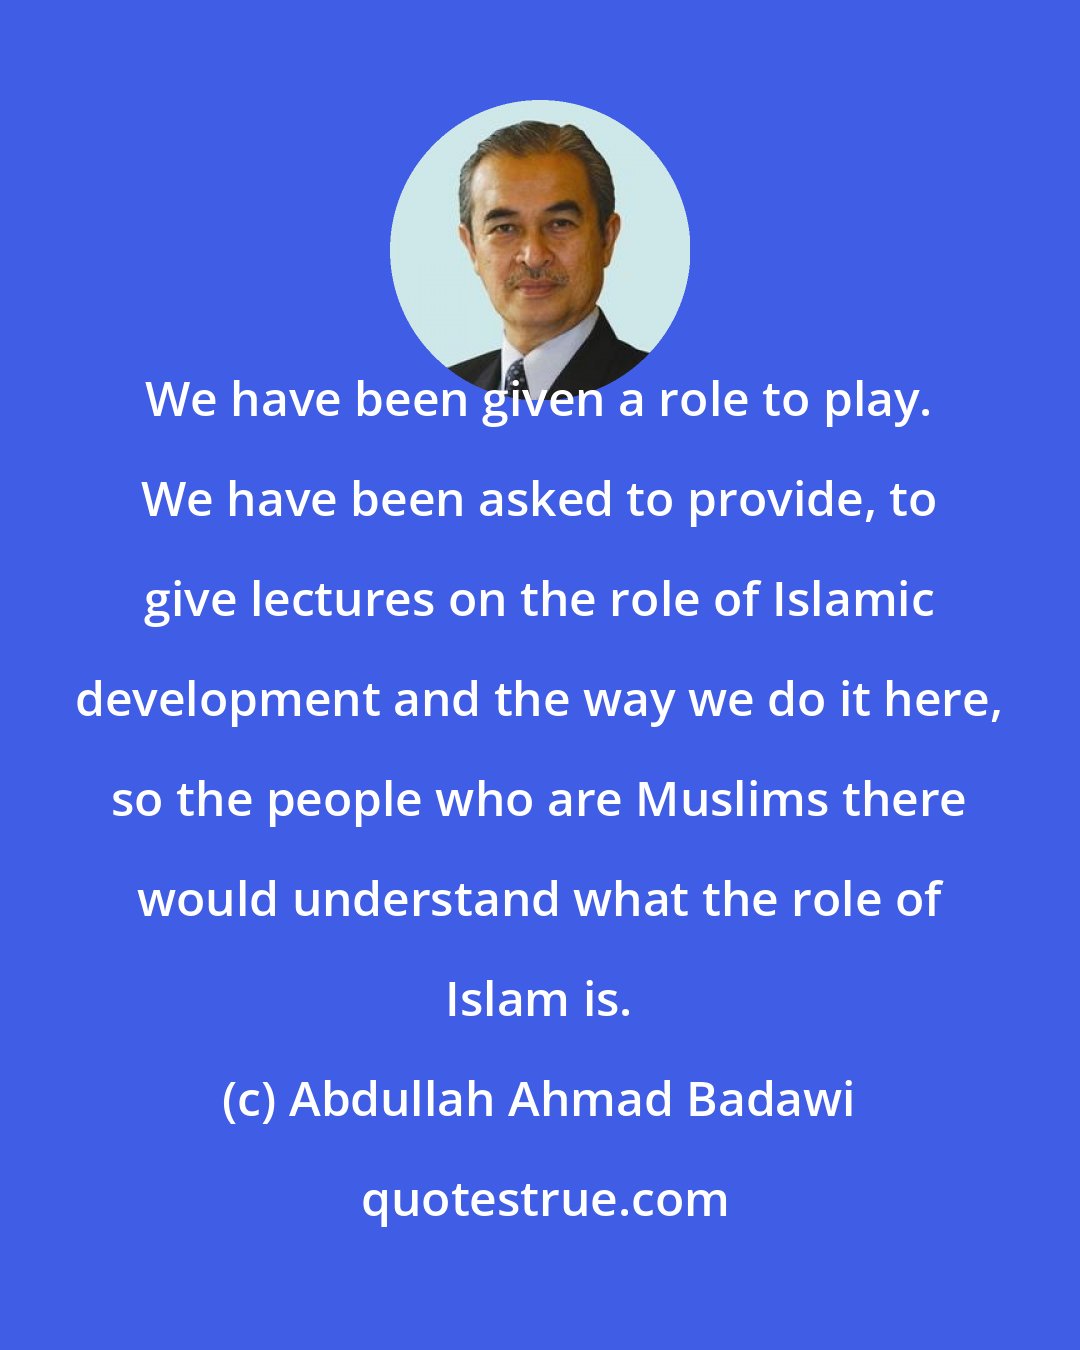 Abdullah Ahmad Badawi: We have been given a role to play. We have been asked to provide, to give lectures on the role of Islamic development and the way we do it here, so the people who are Muslims there would understand what the role of Islam is.